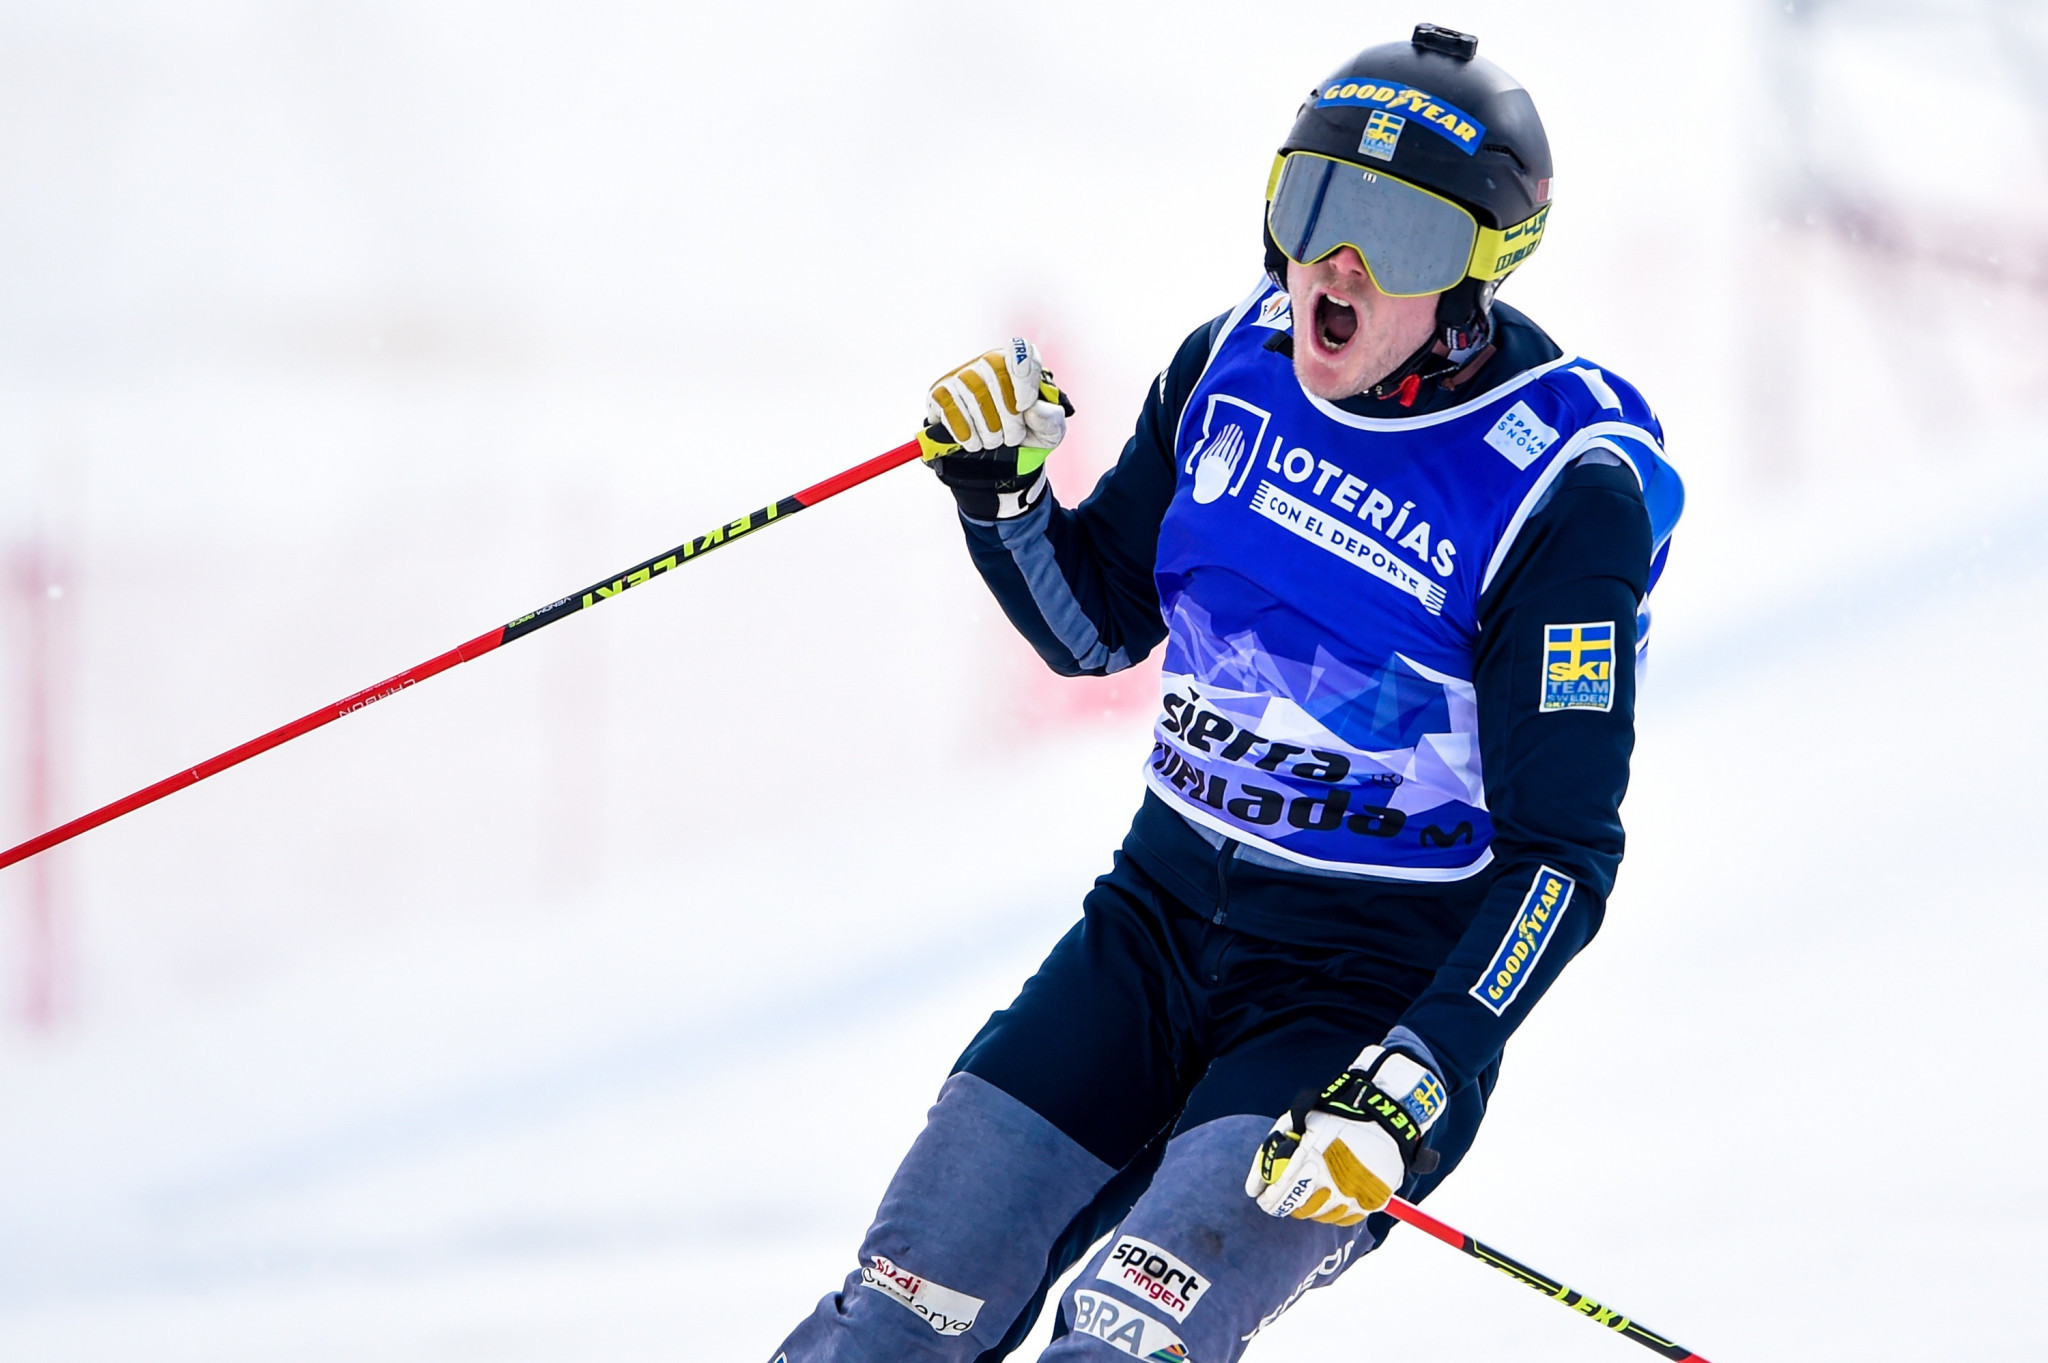 Sweden’s Victor Oehling Norberg delighted the home crowd by topping the men's standings on the opening day of qualification at the FIS Ski Cross World Cup in Idre Fjäll ©Getty Images